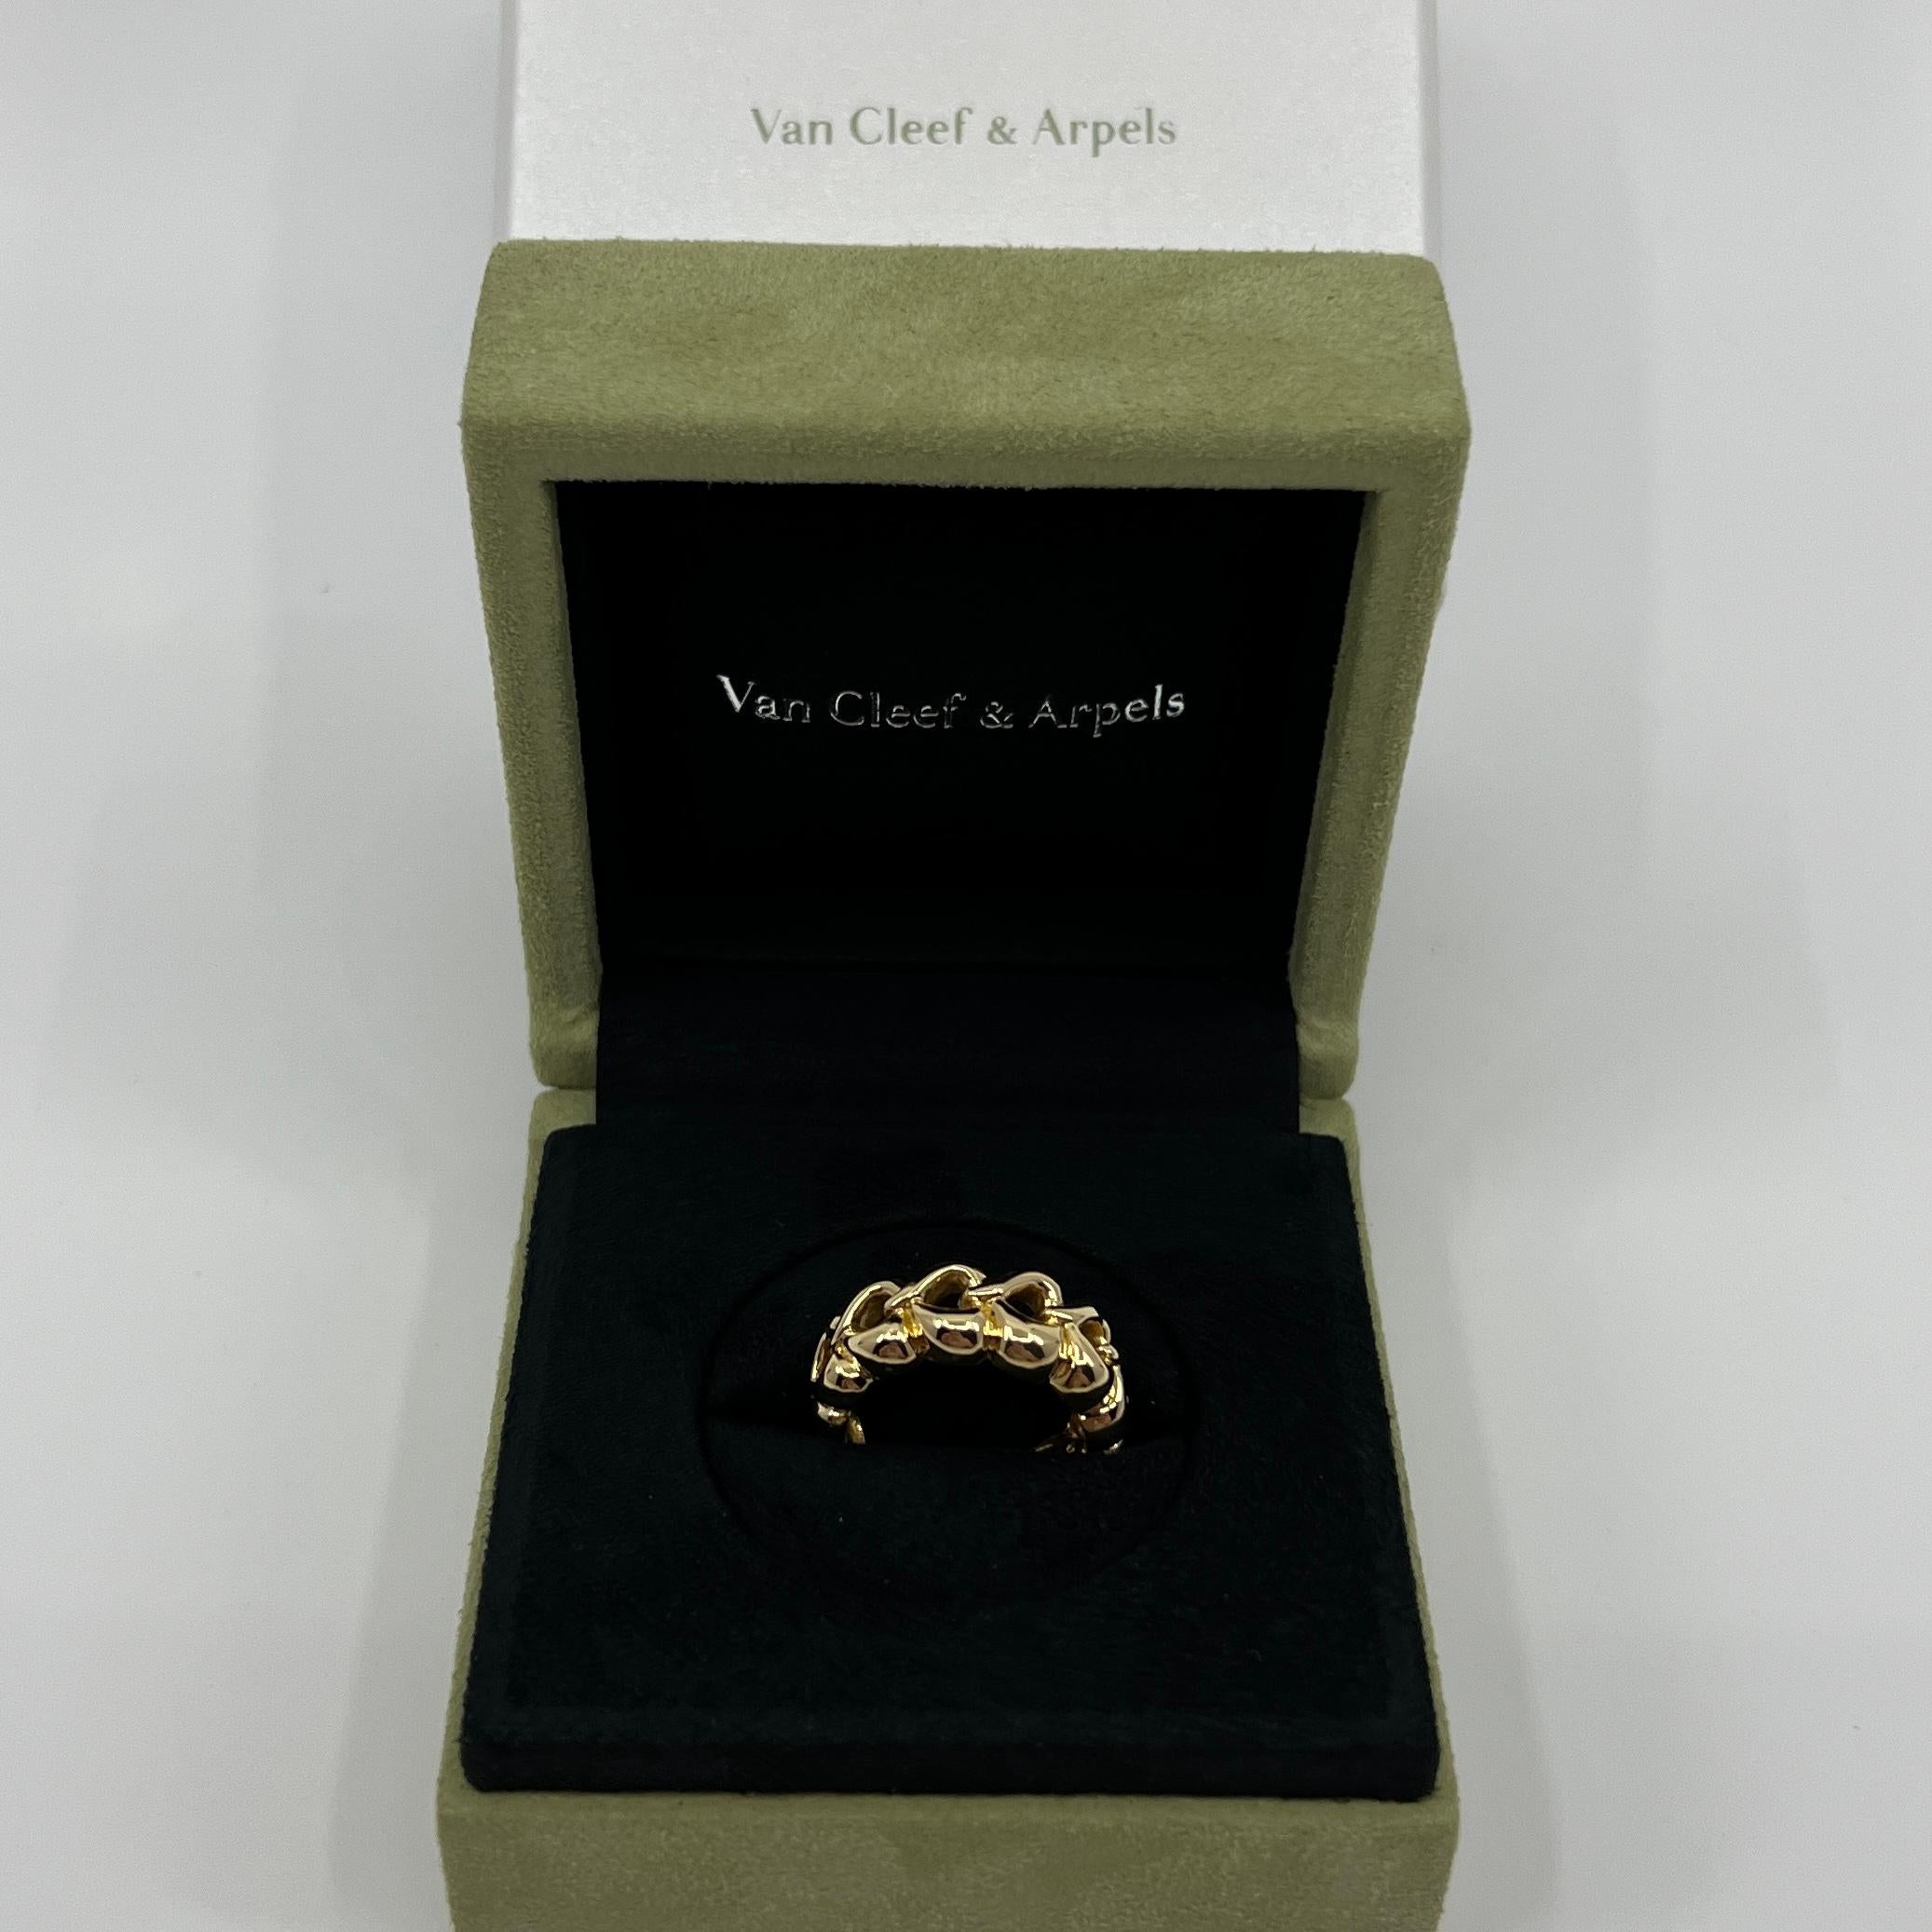 Rare Vintage Van Cleef & Arpels 18k Yellow Gold Open Heart Band Ring with Box 8